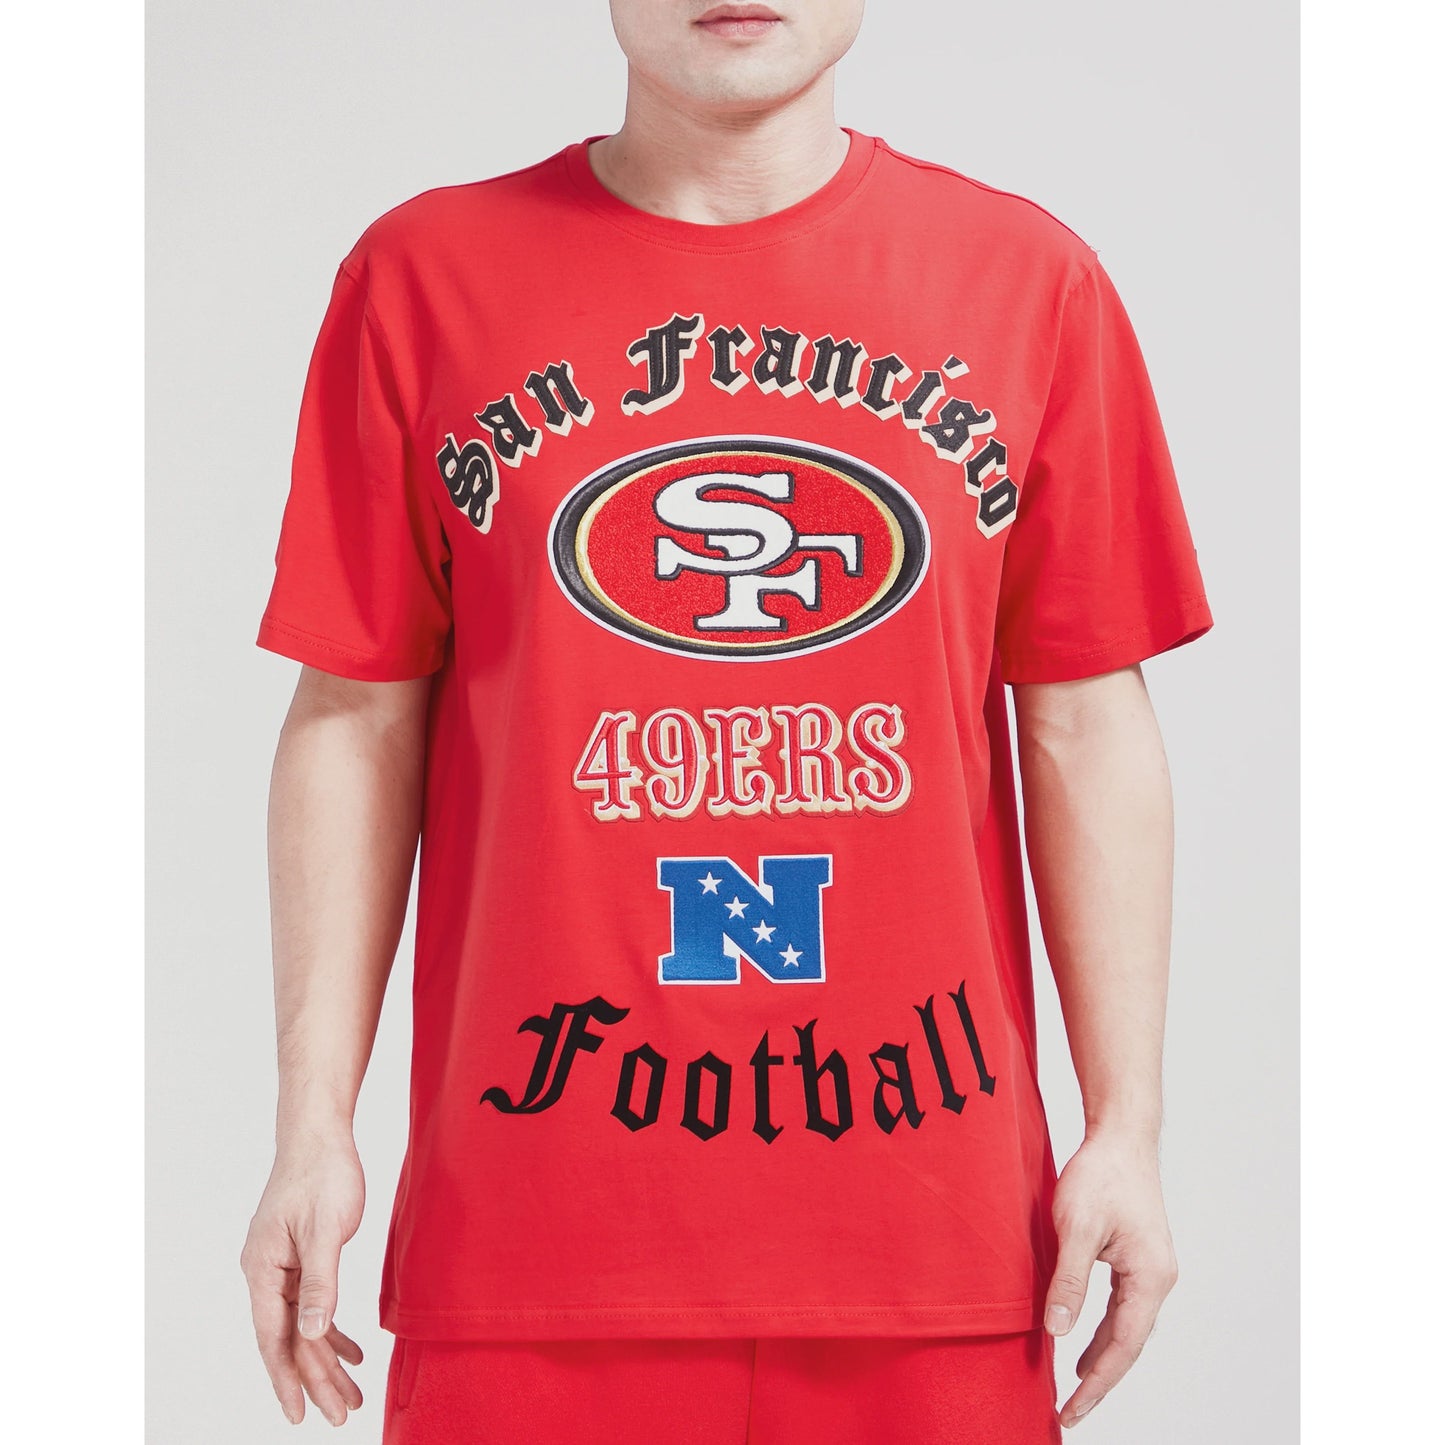 Pro Standard San Francisco 49ers Old English Tee - Red (FS41410349-RED)